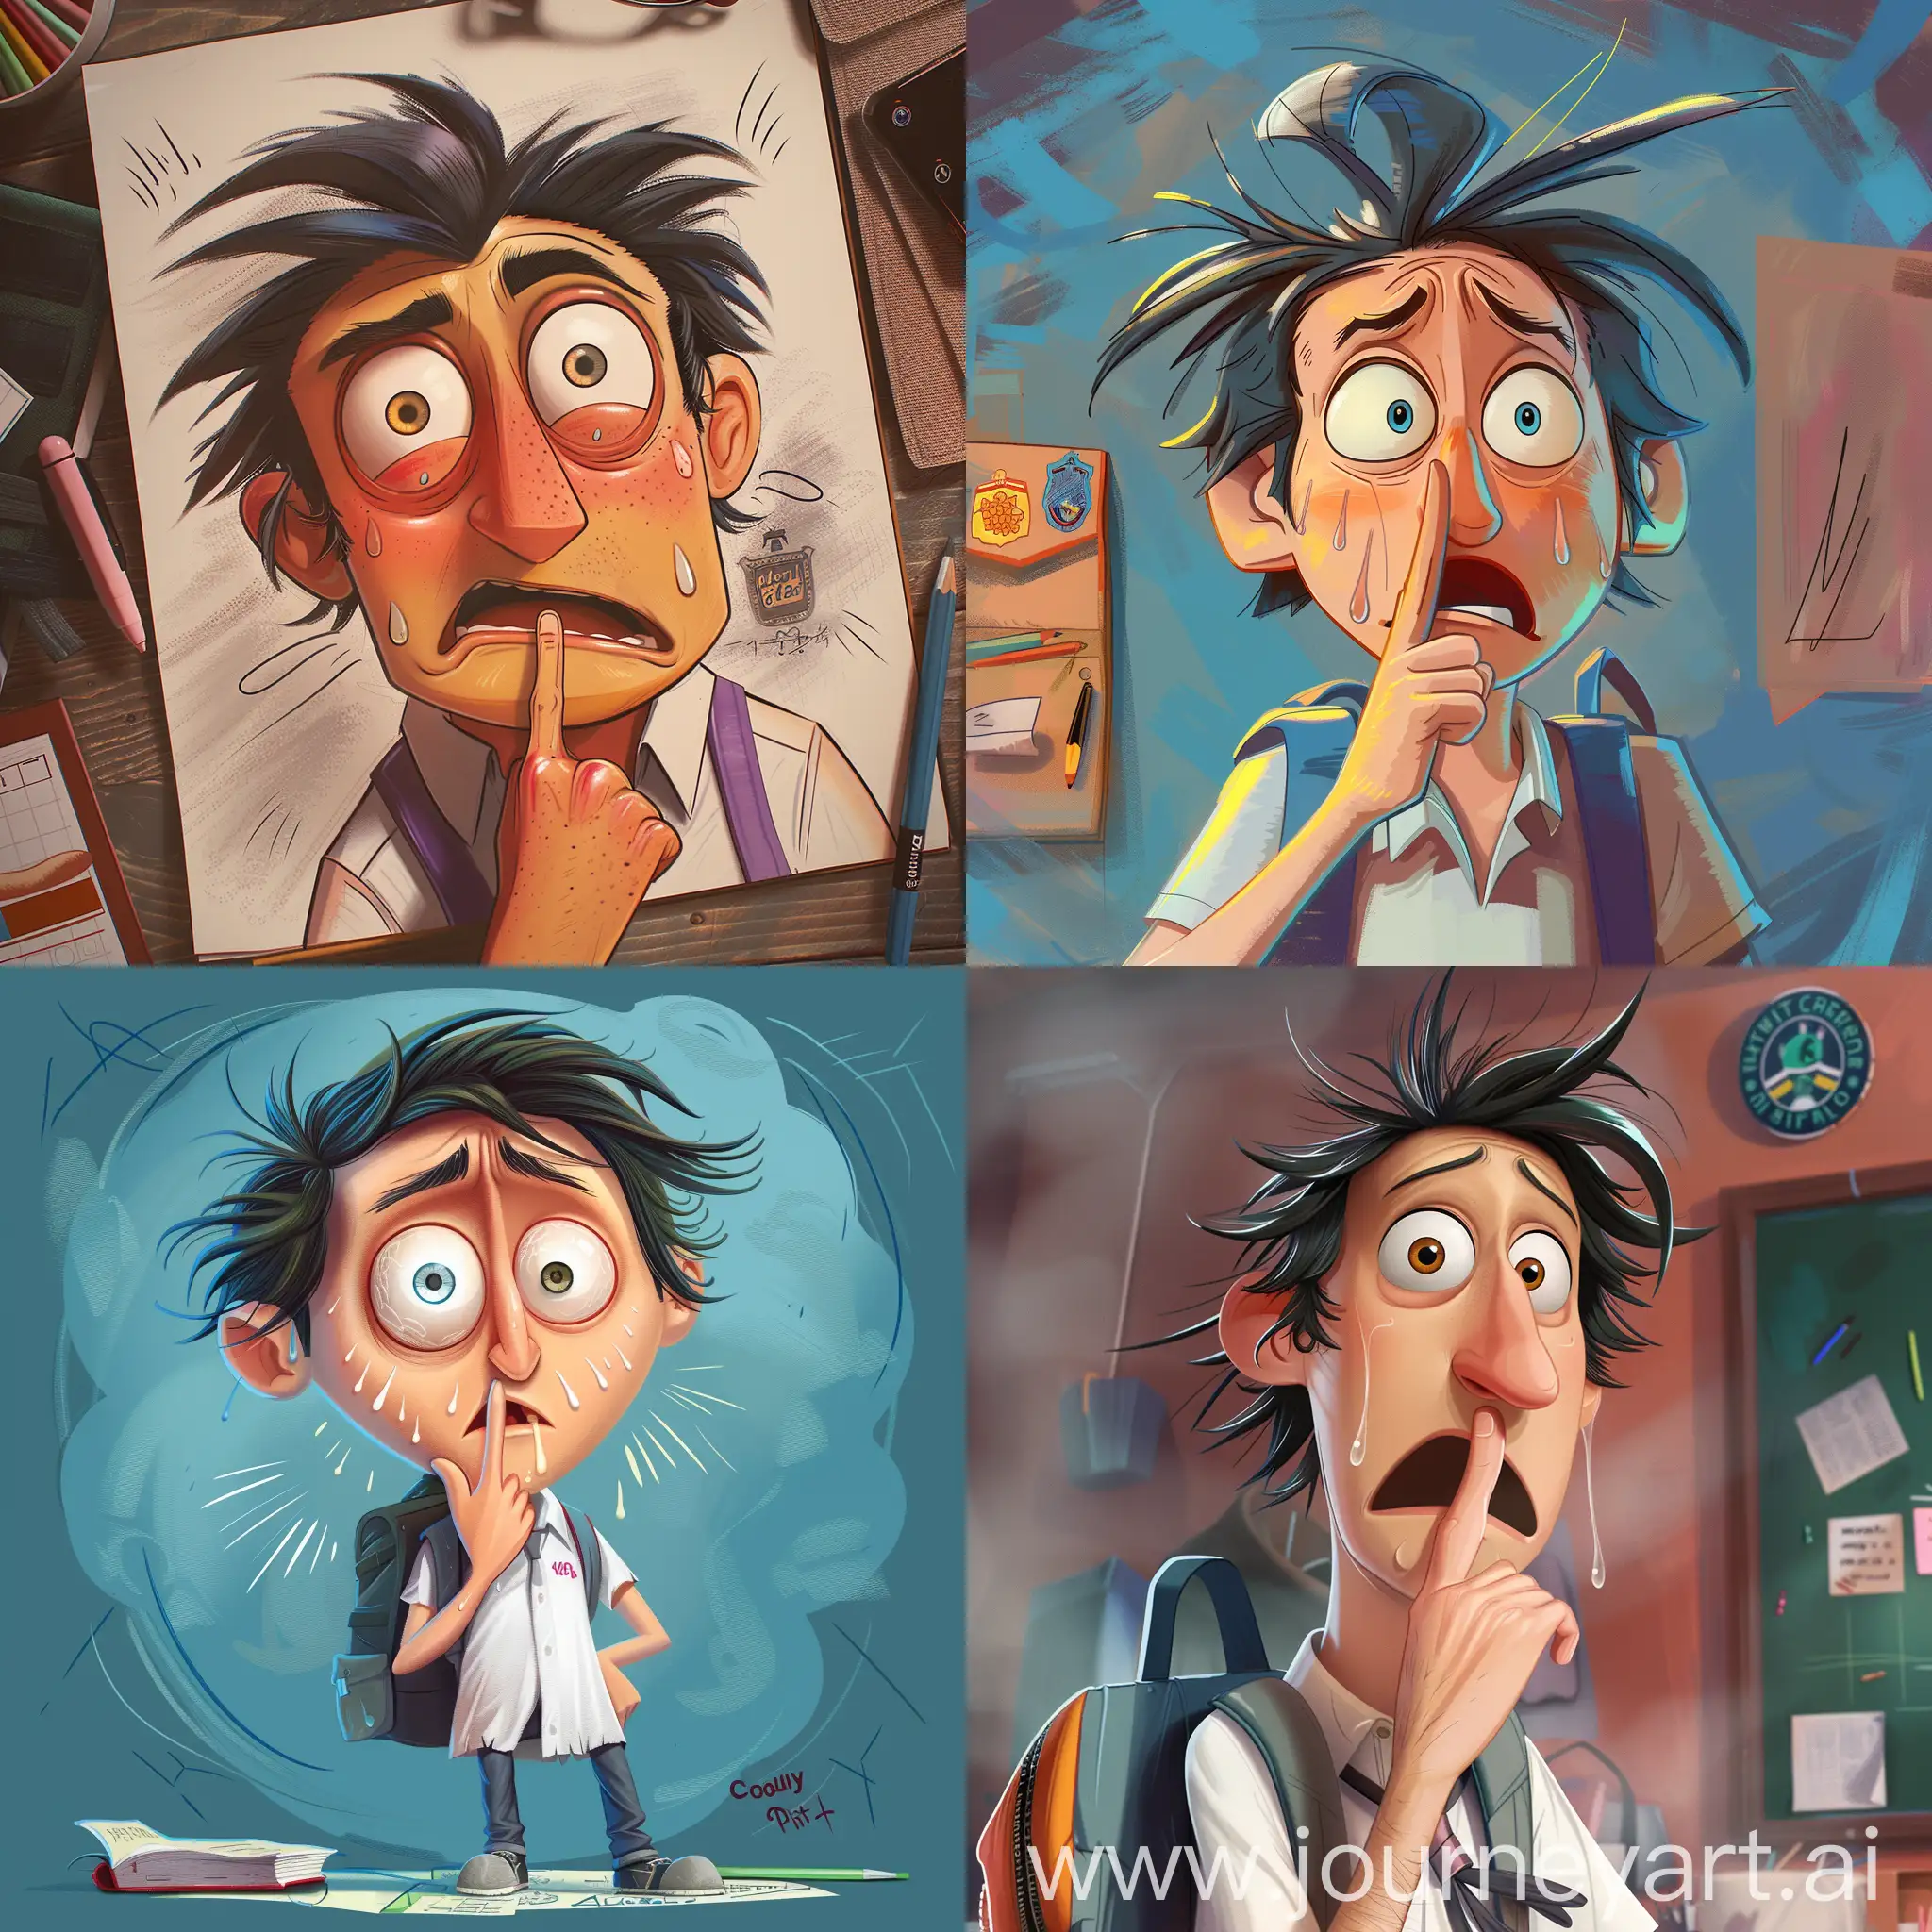 Sketching the Concept: Begin by sketching the character based on the main character from "Cloudy with a Chance of Meatballs" with the described expression and pose. Make sure to include the panicked expression, finger to pursed lips, and furtive glance.
Character Design:
Ensure the character's features resemble the main character from "Cloudy with a Chance of Meatballs" but with the panicked expression and furtive glance.
Add details like sweat beads, widened eyes, and a shushing gesture with the finger.
Incorporate elements that indicate the character is a student, such as a backpack, books, or a school uniform.
Background Detail: Add one small background item that reinforces the character's student status, such as a school crest, a blackboard, or a backpack with books.

Coloring and Shading: Use vibrant colors typical of Disney Pixar animation and add shading to give the illustration depth and dimension. Pay attention to lighting and shadow placement to enhance the character's expression and the overall mood of the scene.
